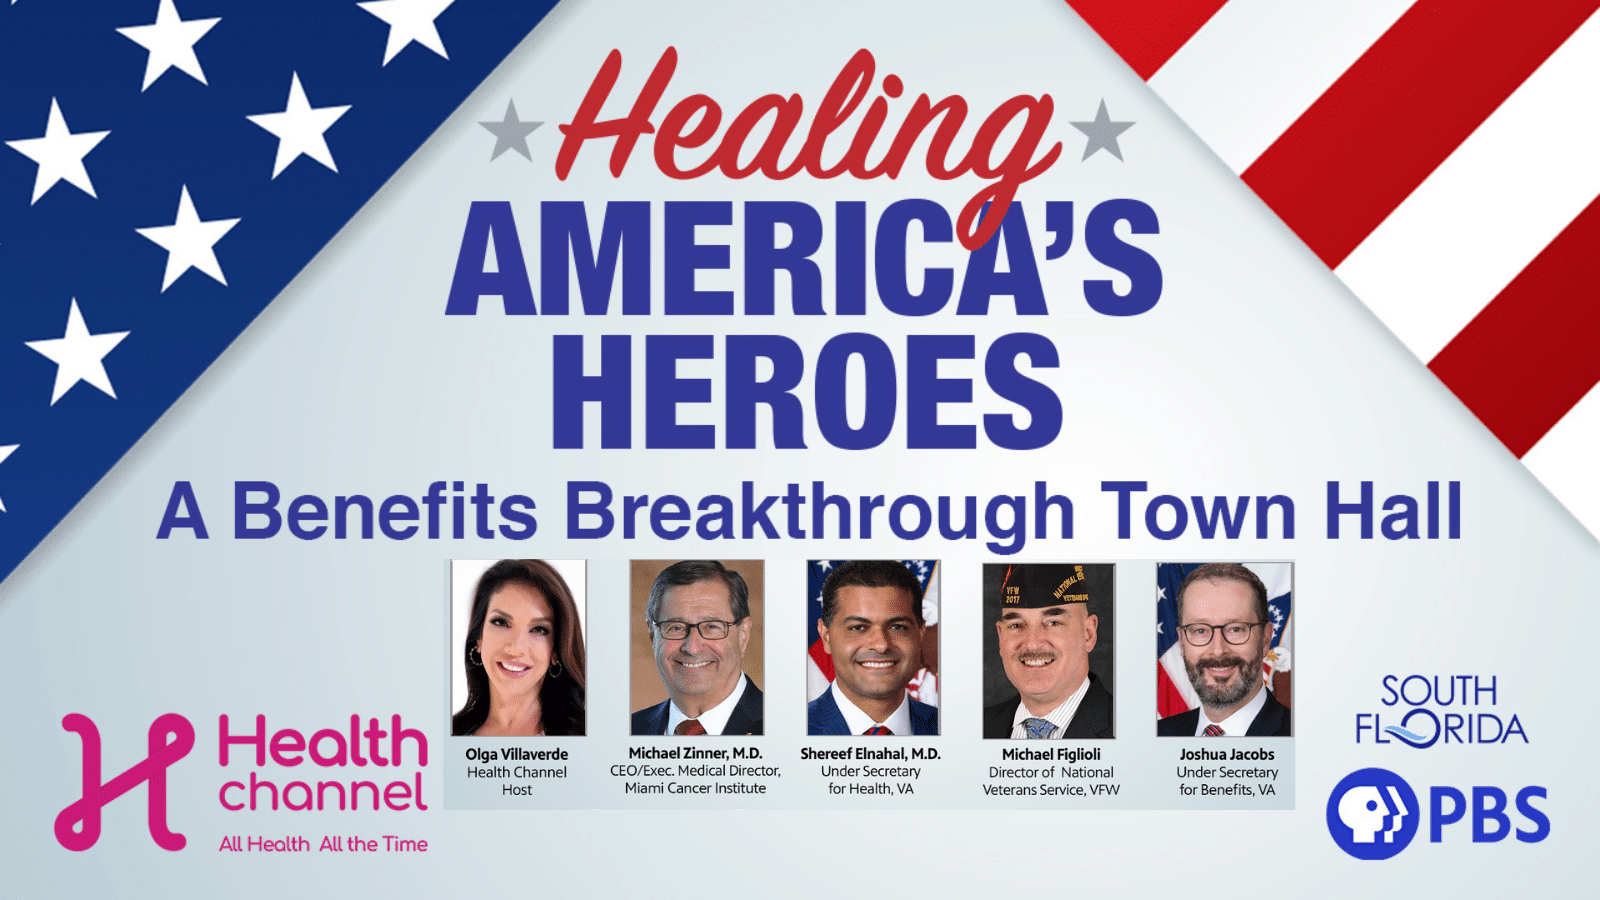 Healing America’s Heroes: A Benefits Breakthrough Town Hall